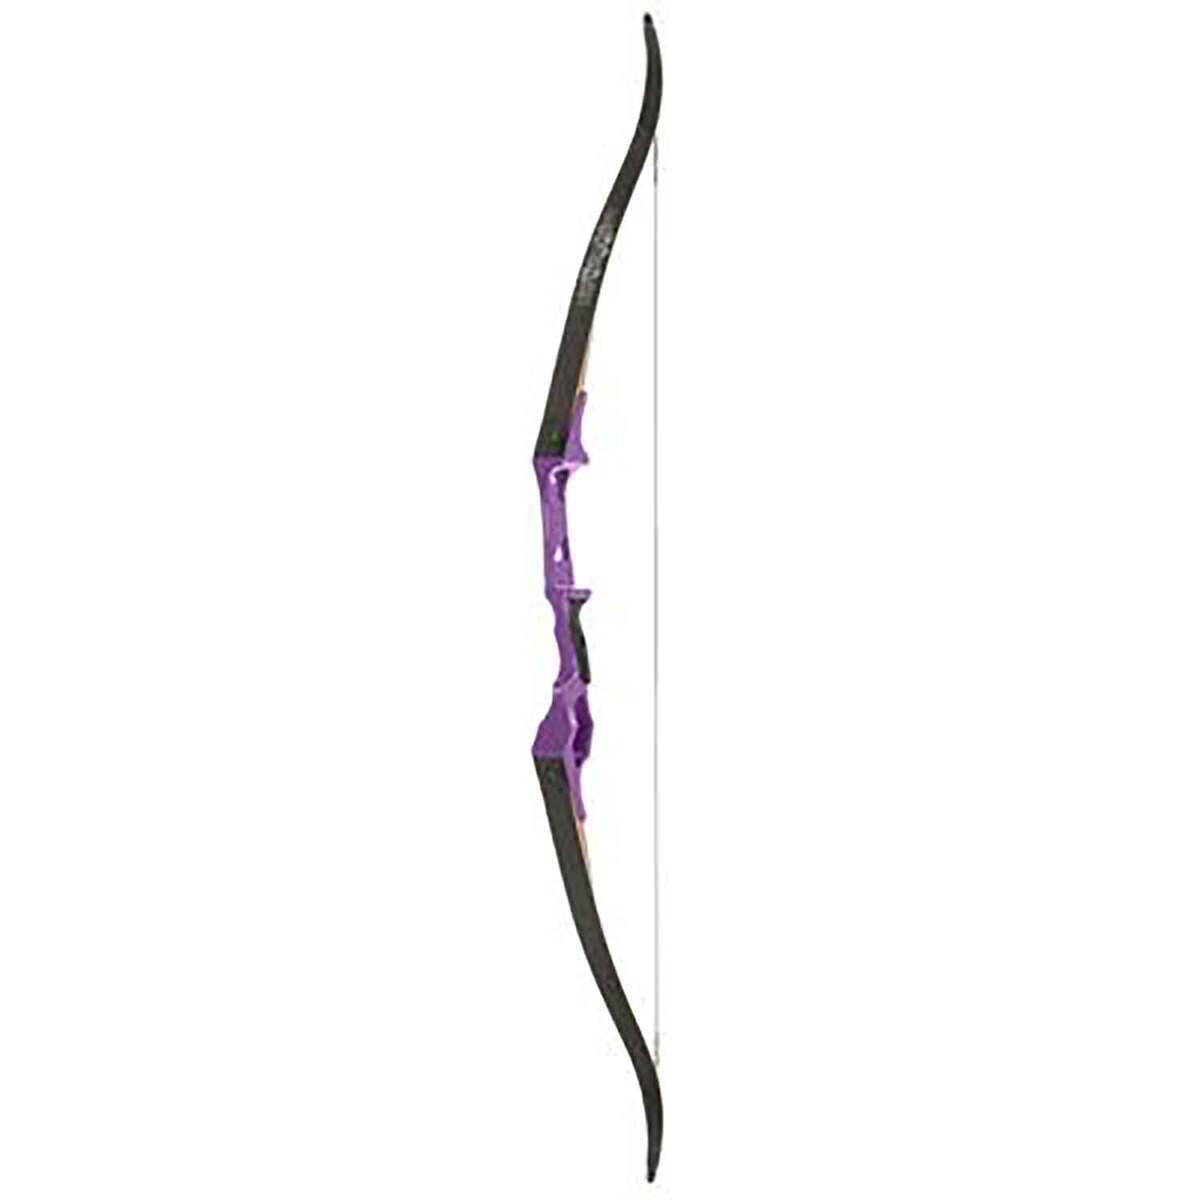 Western Edge 45lbs Right Hand Wood Recurve Bow - Bowfishing